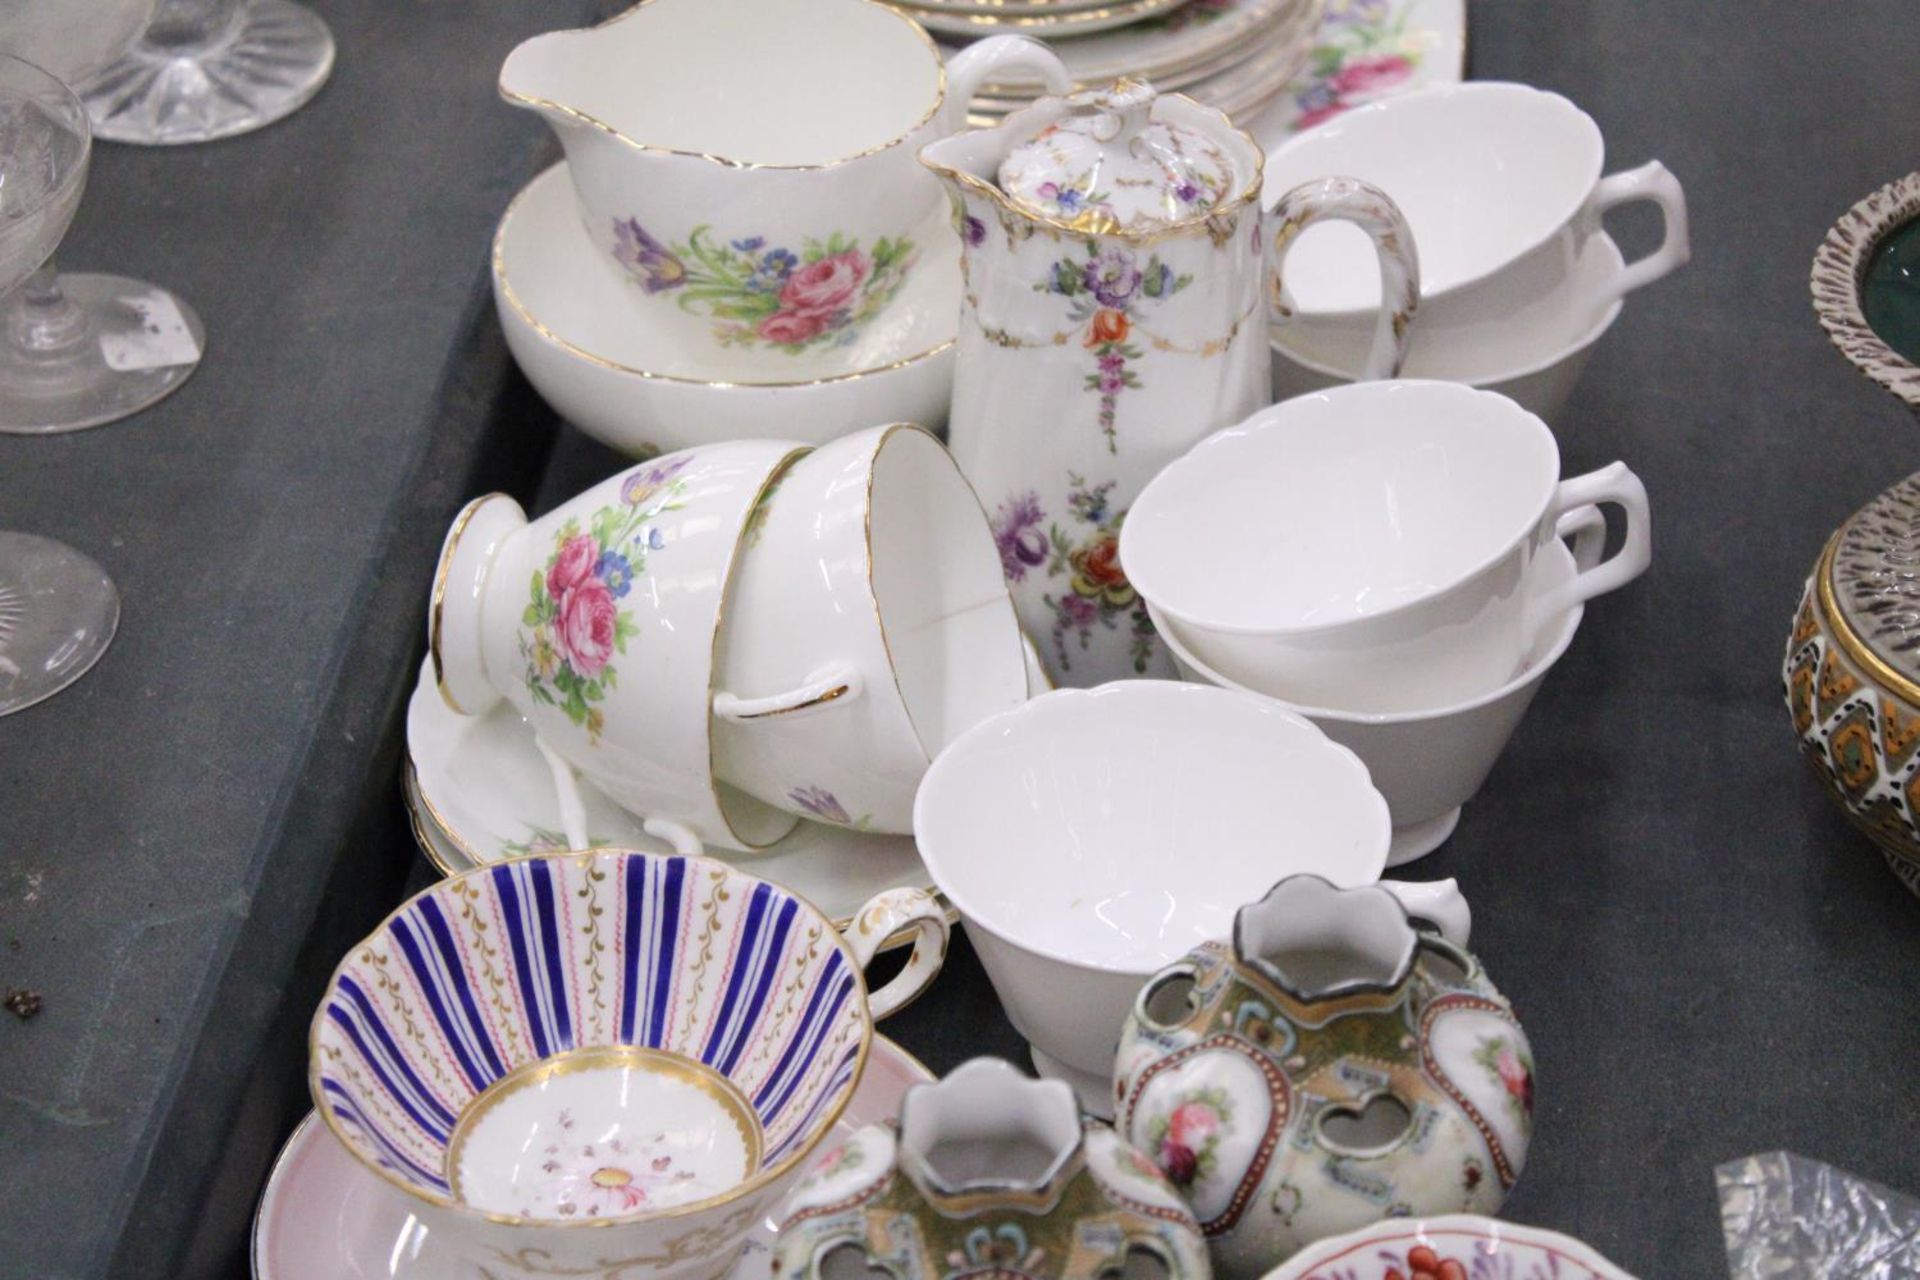 A FOLEY CHINA PART TEASET TO INCLUDE A CAKE PLATE, A CREAM JUG, SUGAR BOWL, CUPS, SAUCERS AND SIDE - Image 4 of 6